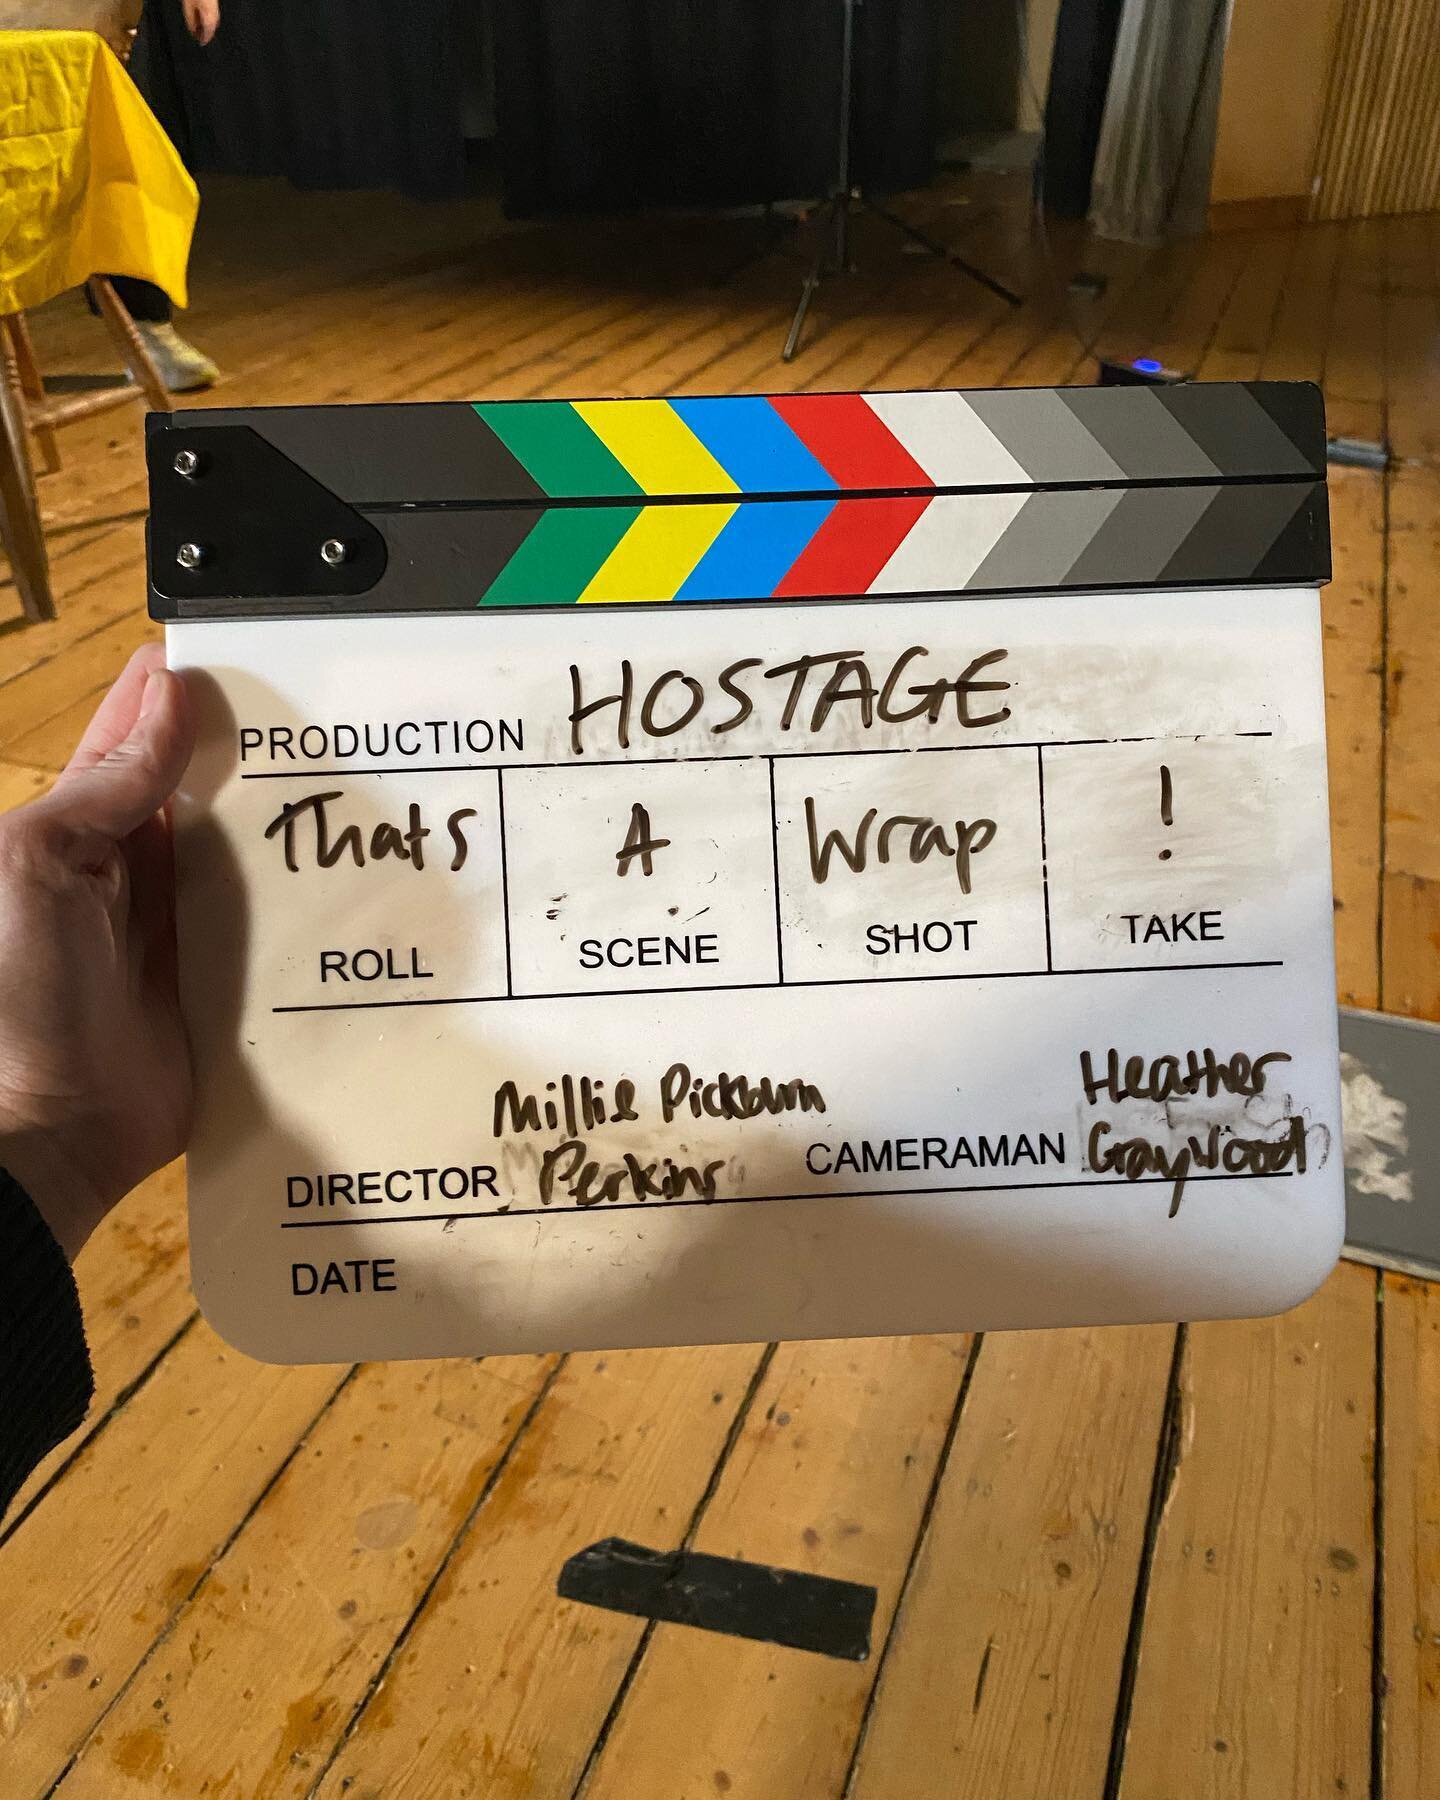 That&rsquo;s a wrap for &rdquo;Hostage&rdquo;!